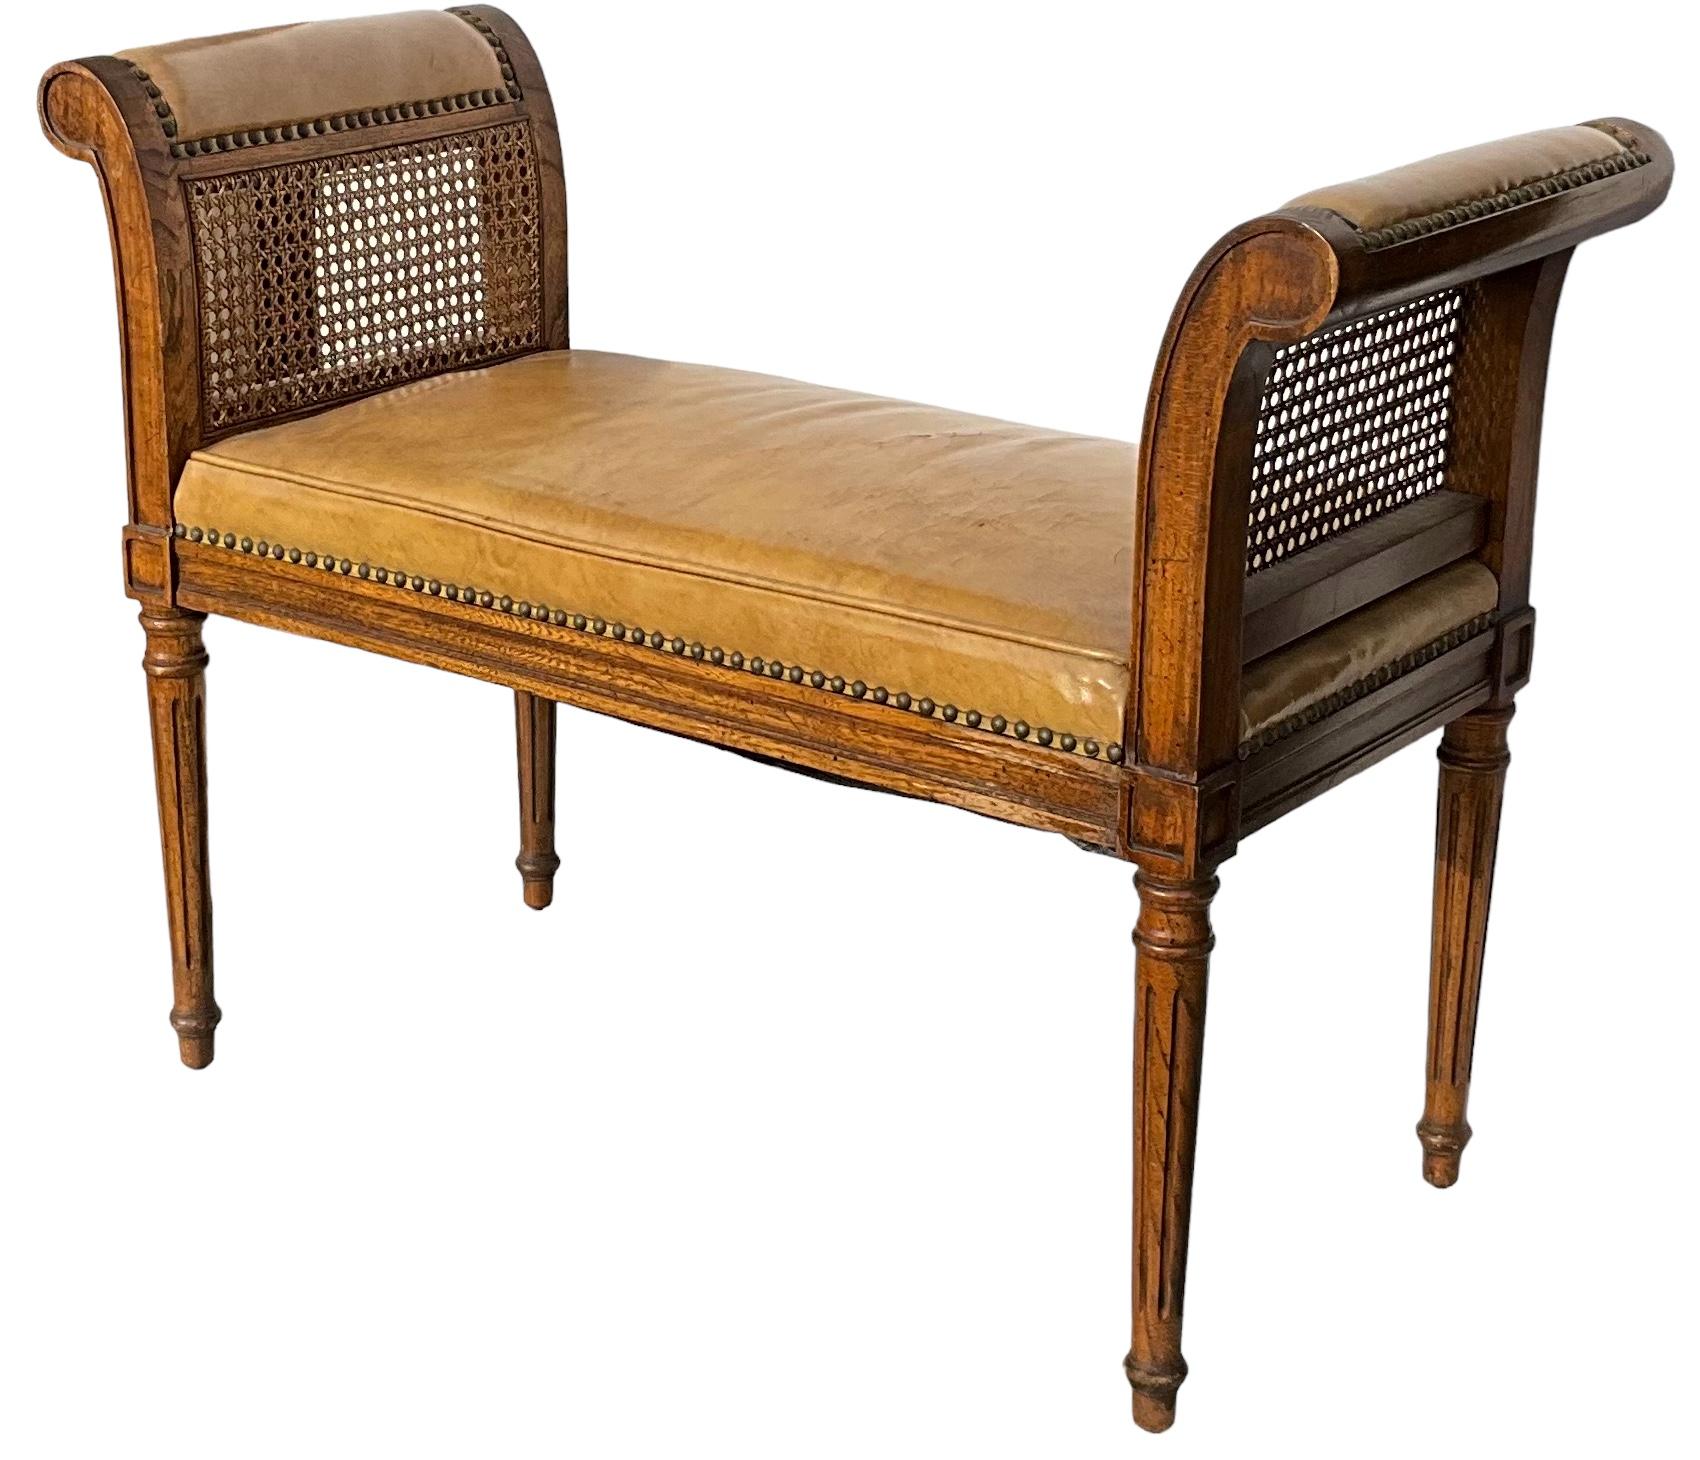 French Style Italian Walnut And Leather Bench / Ottoman With Brass Nailheads 5